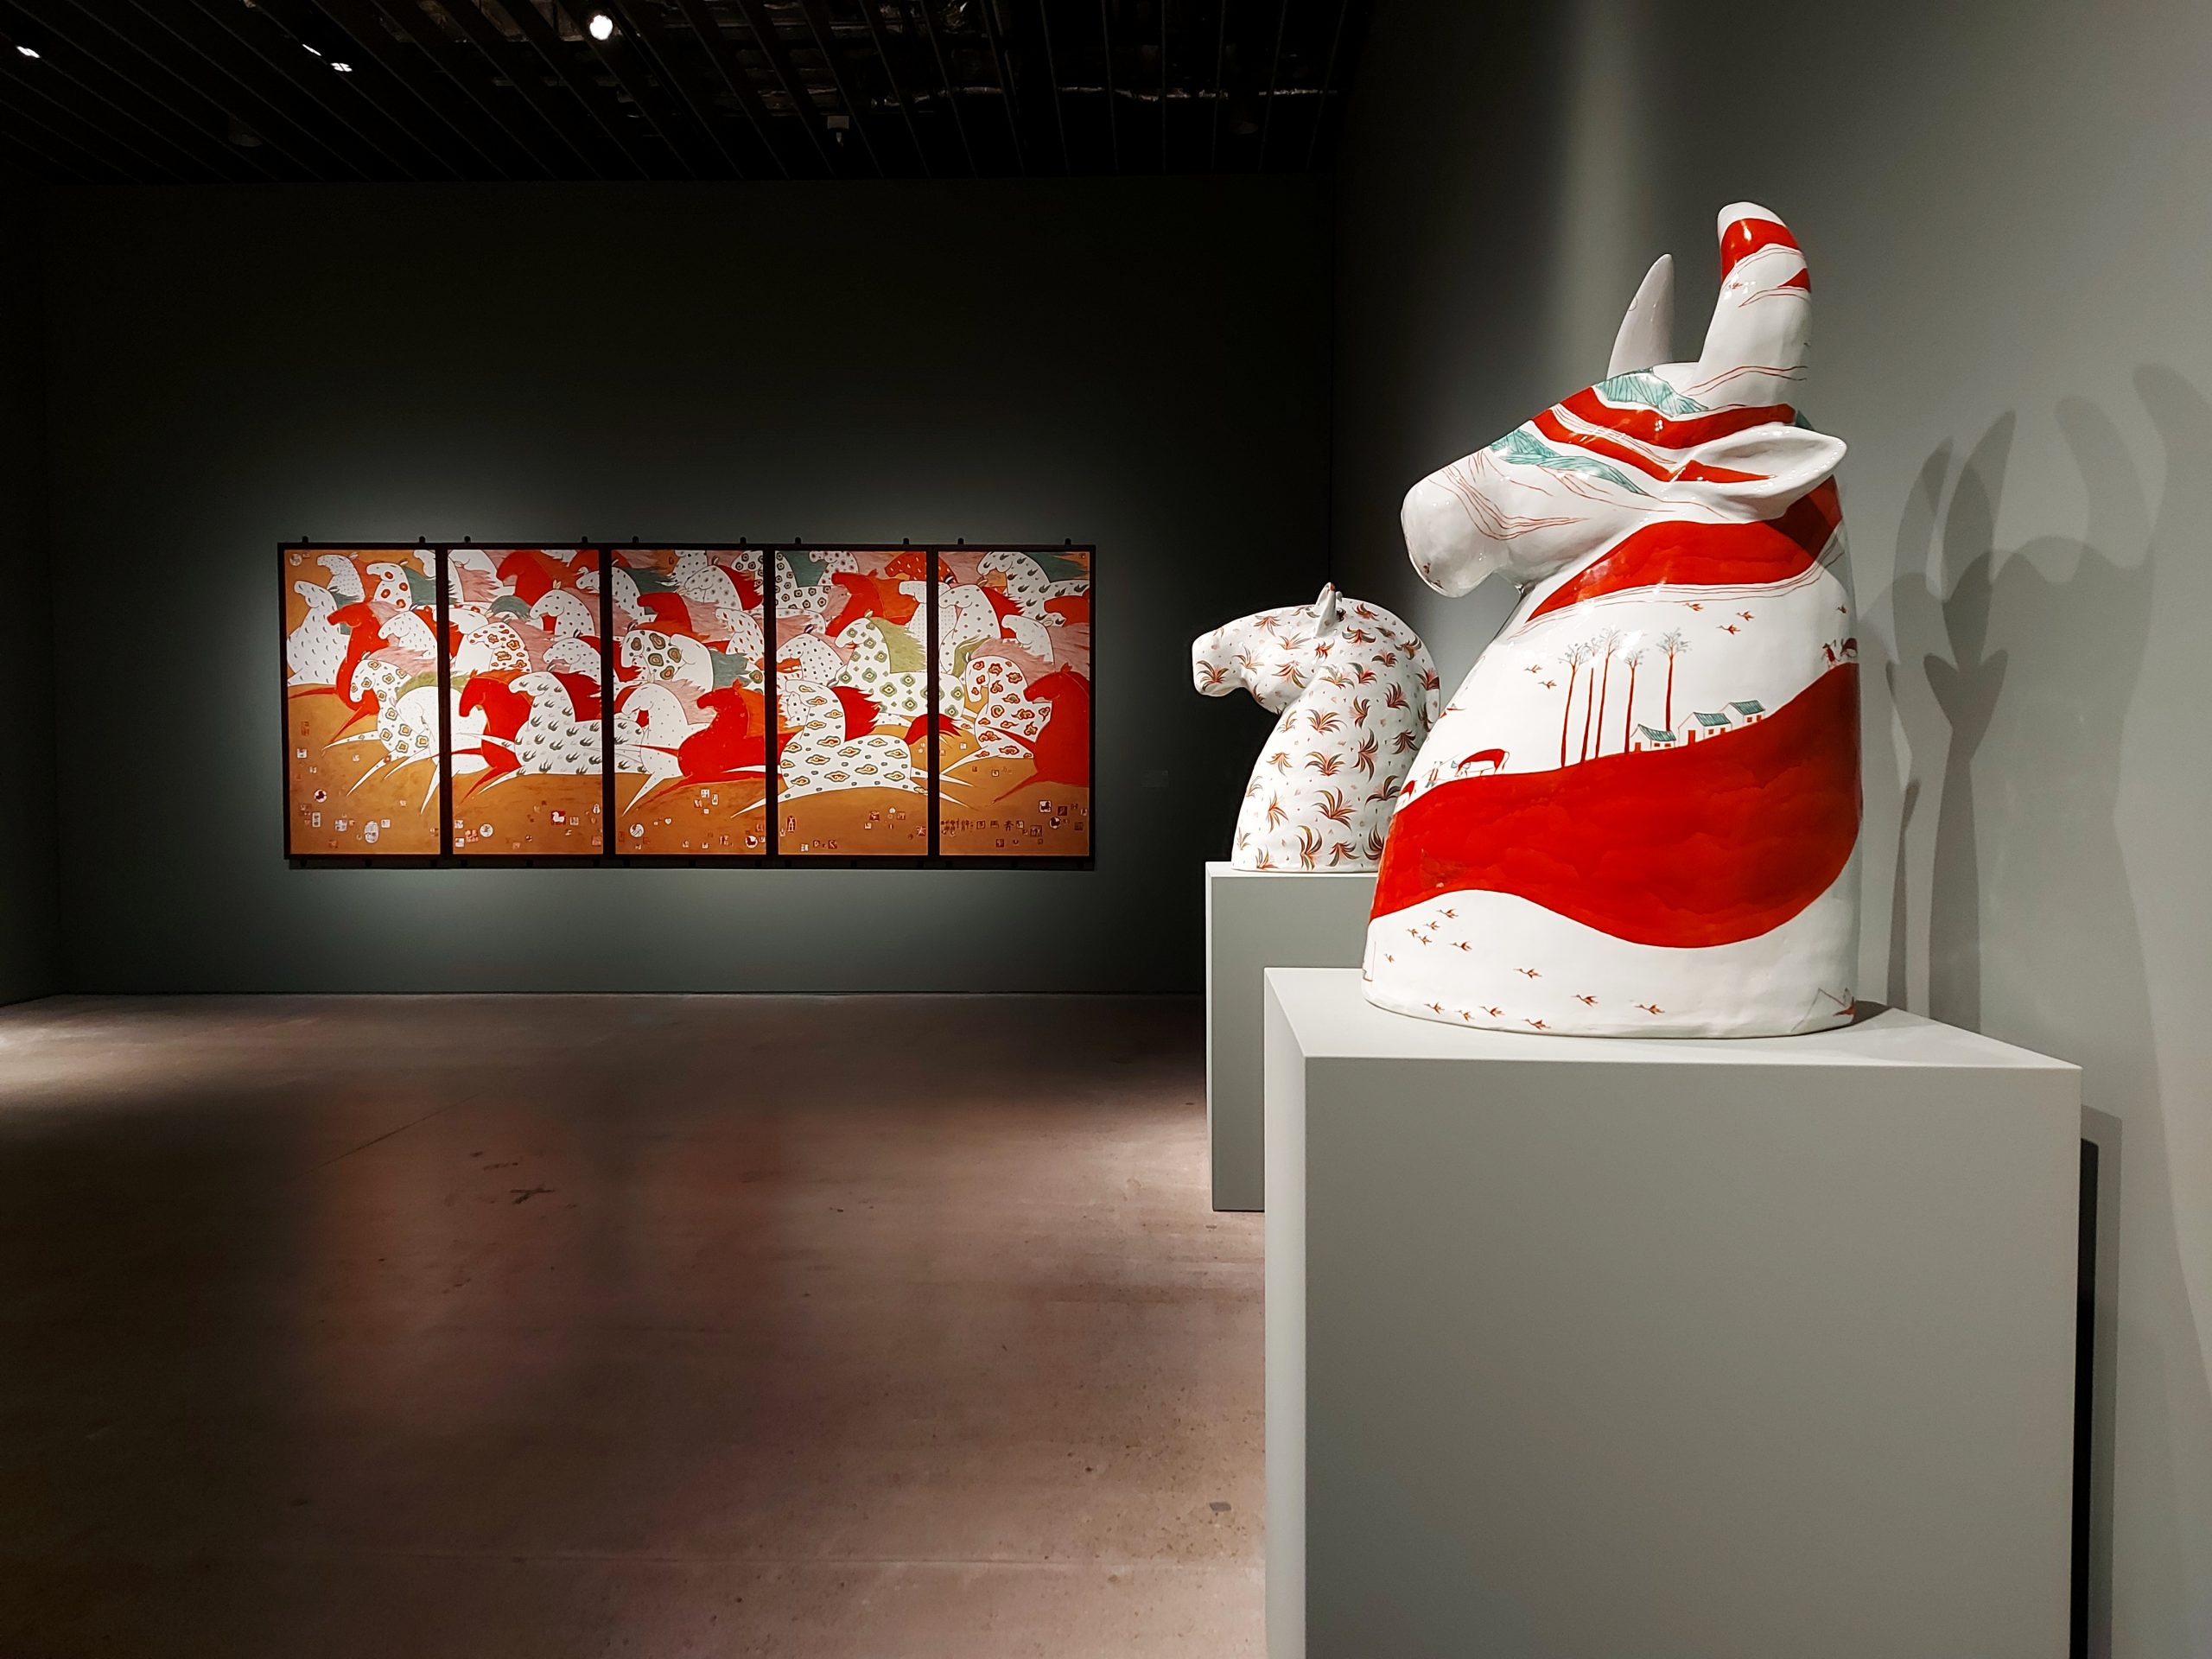 Wynn Macau’s ‘Illusions and Reflections’ exhibitions open